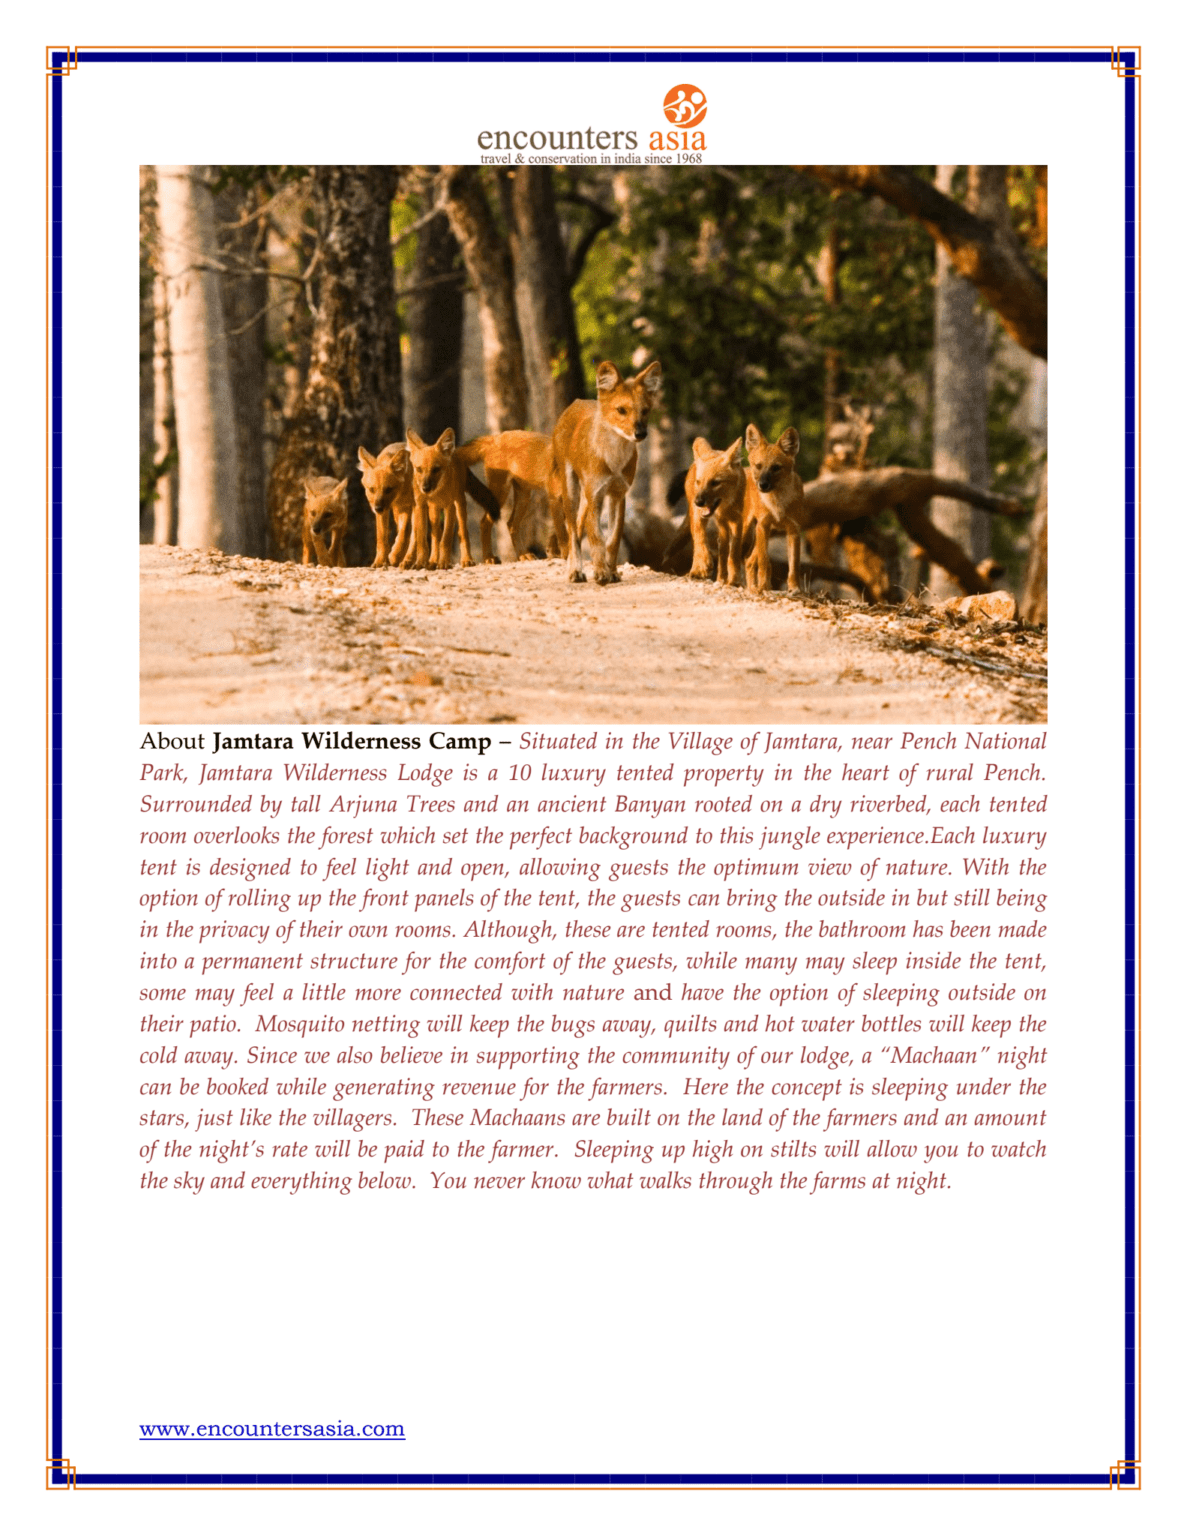 Dhole (wild dogs) in Pench National Park